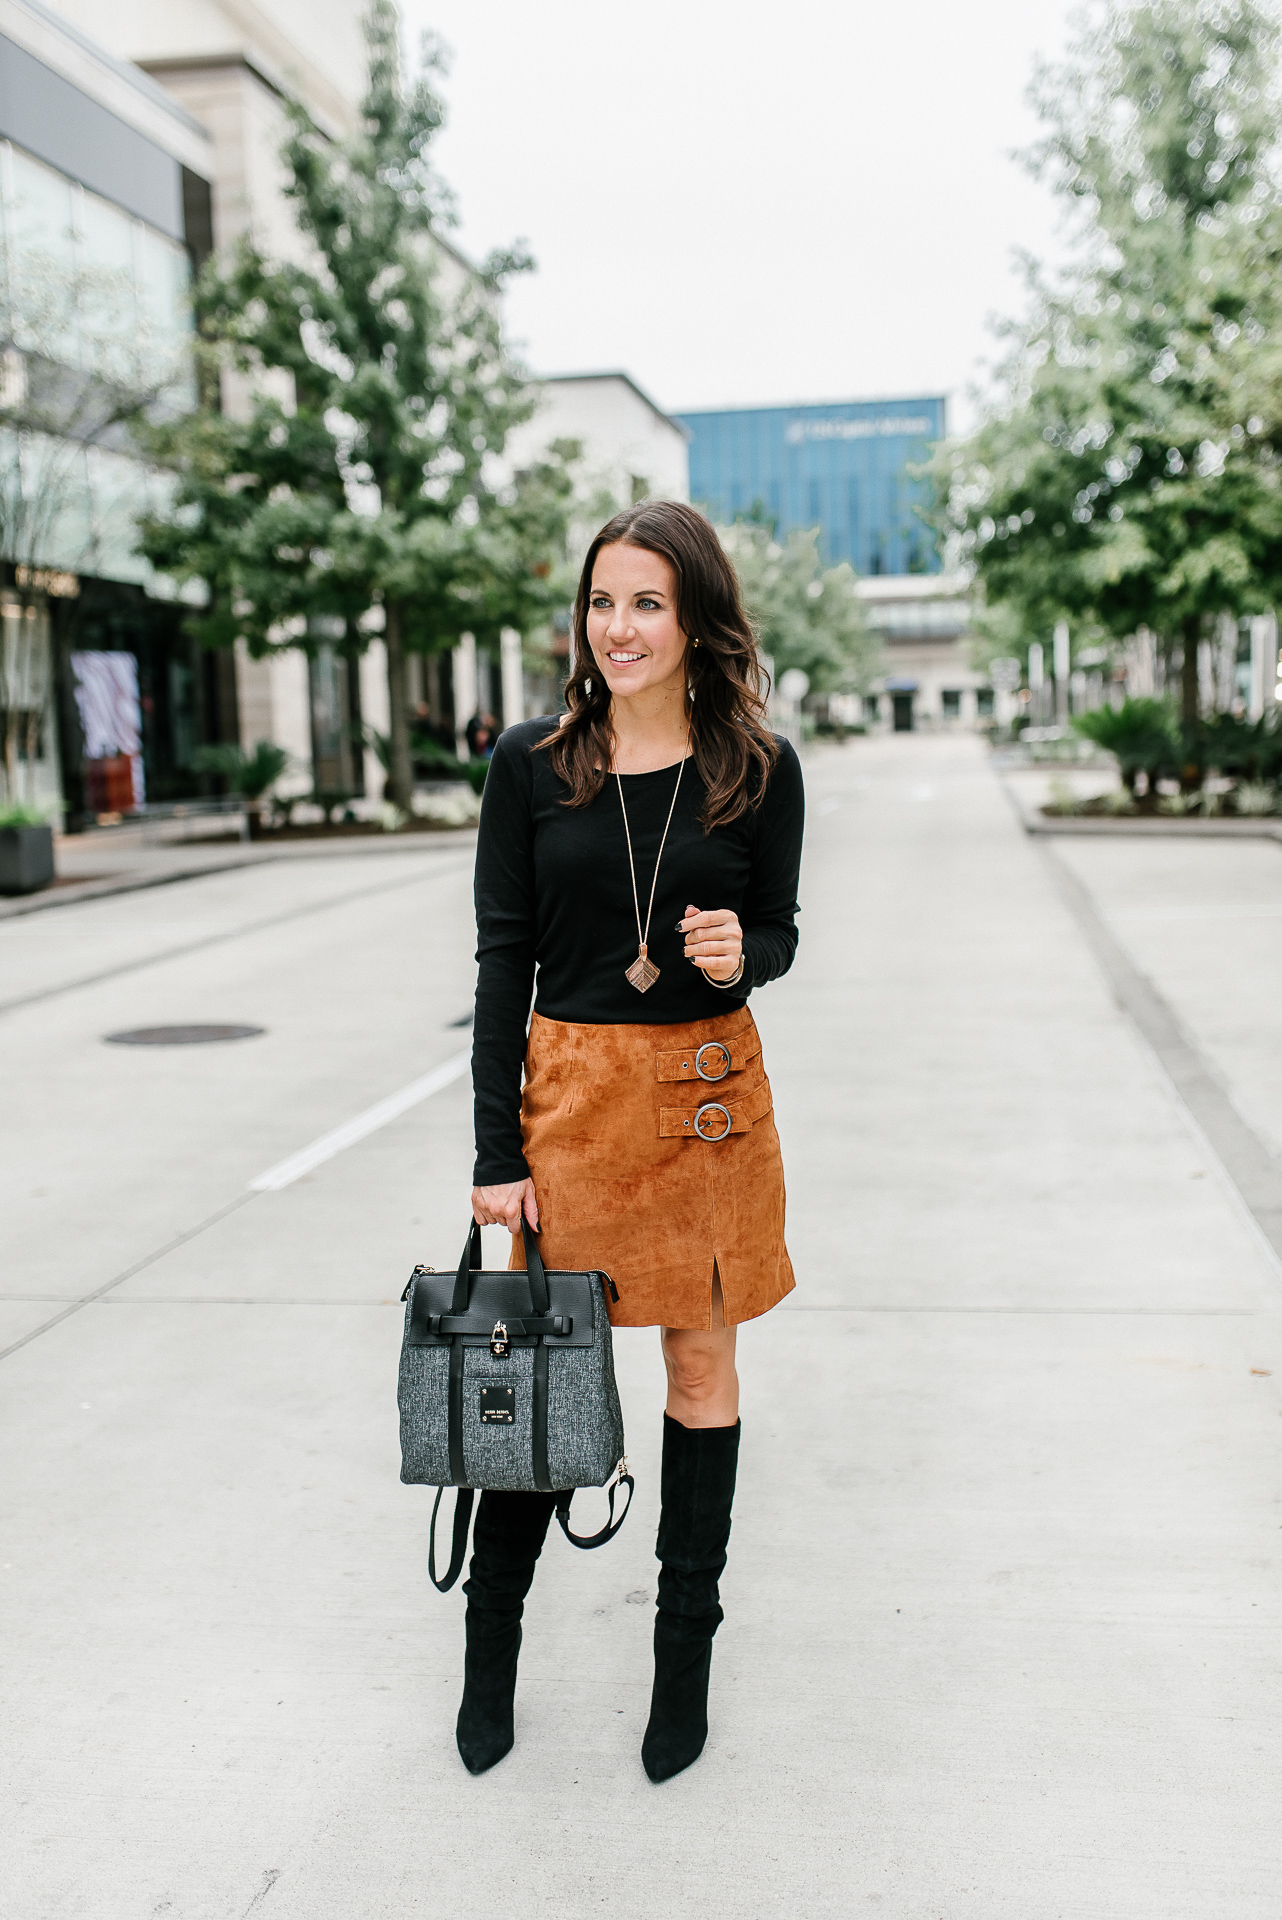 http://ladyinviolet.com/wp-content/uploads/2018/10/a-fall-outfit-brown-suede-skirt-black-slouchy-boots.jpg